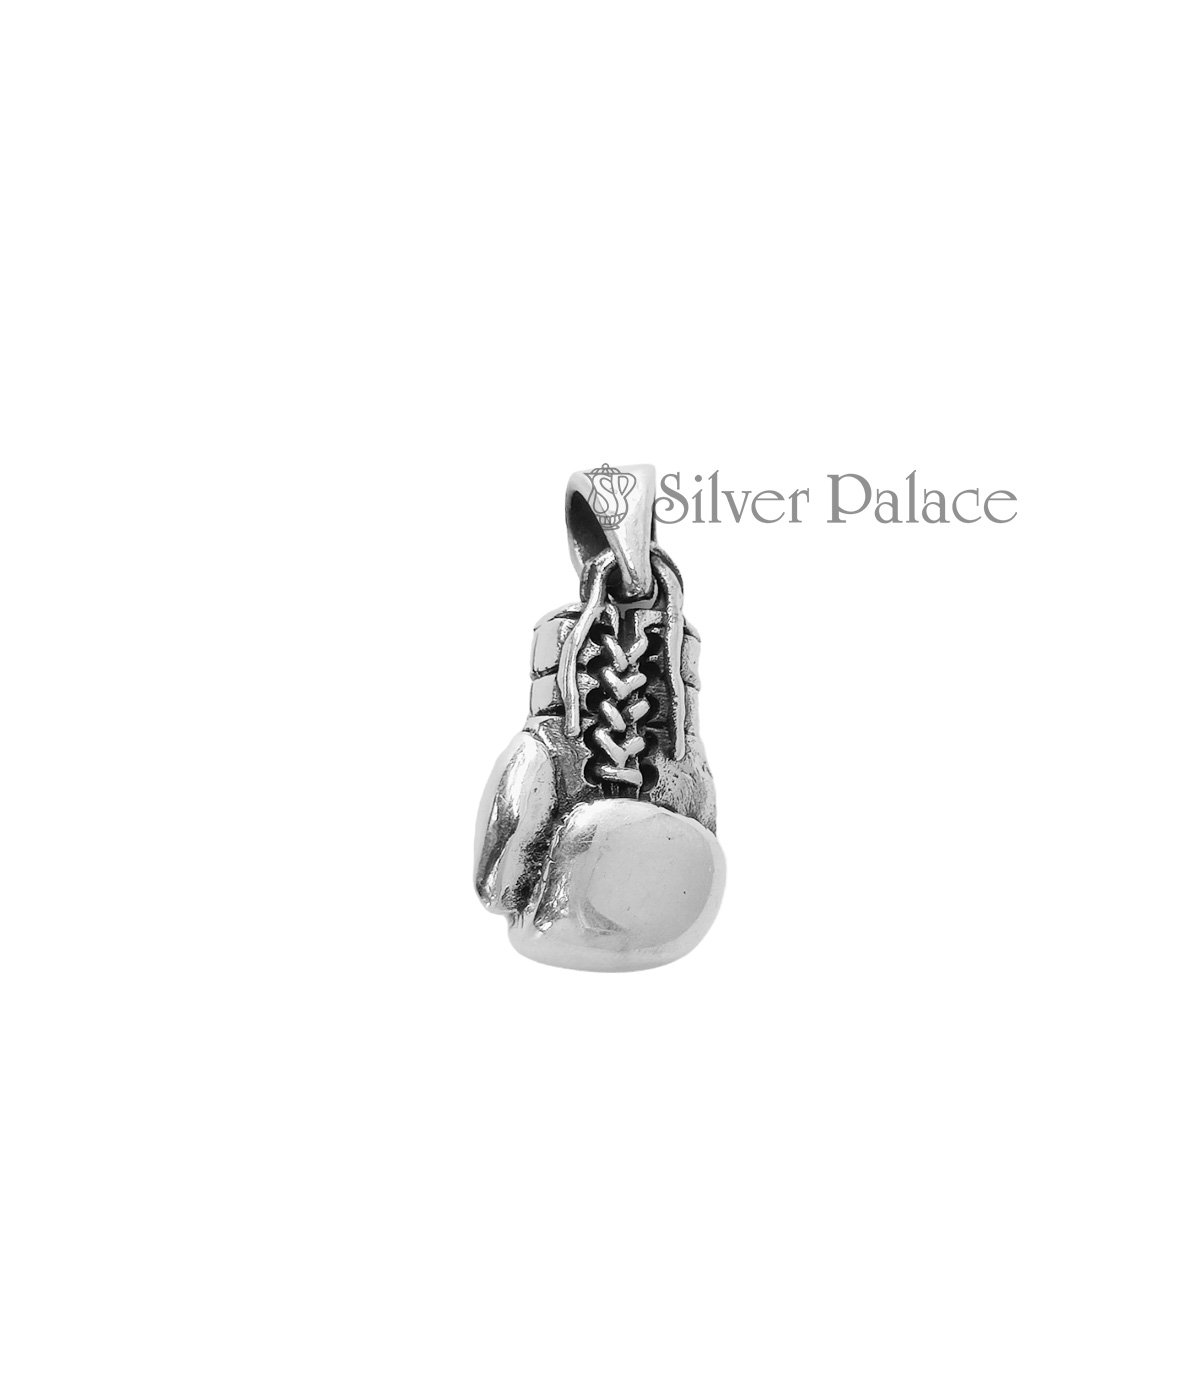 STERLING SILVER BOXING GLOVES DESIGN PENDANT BOXING LOVERS